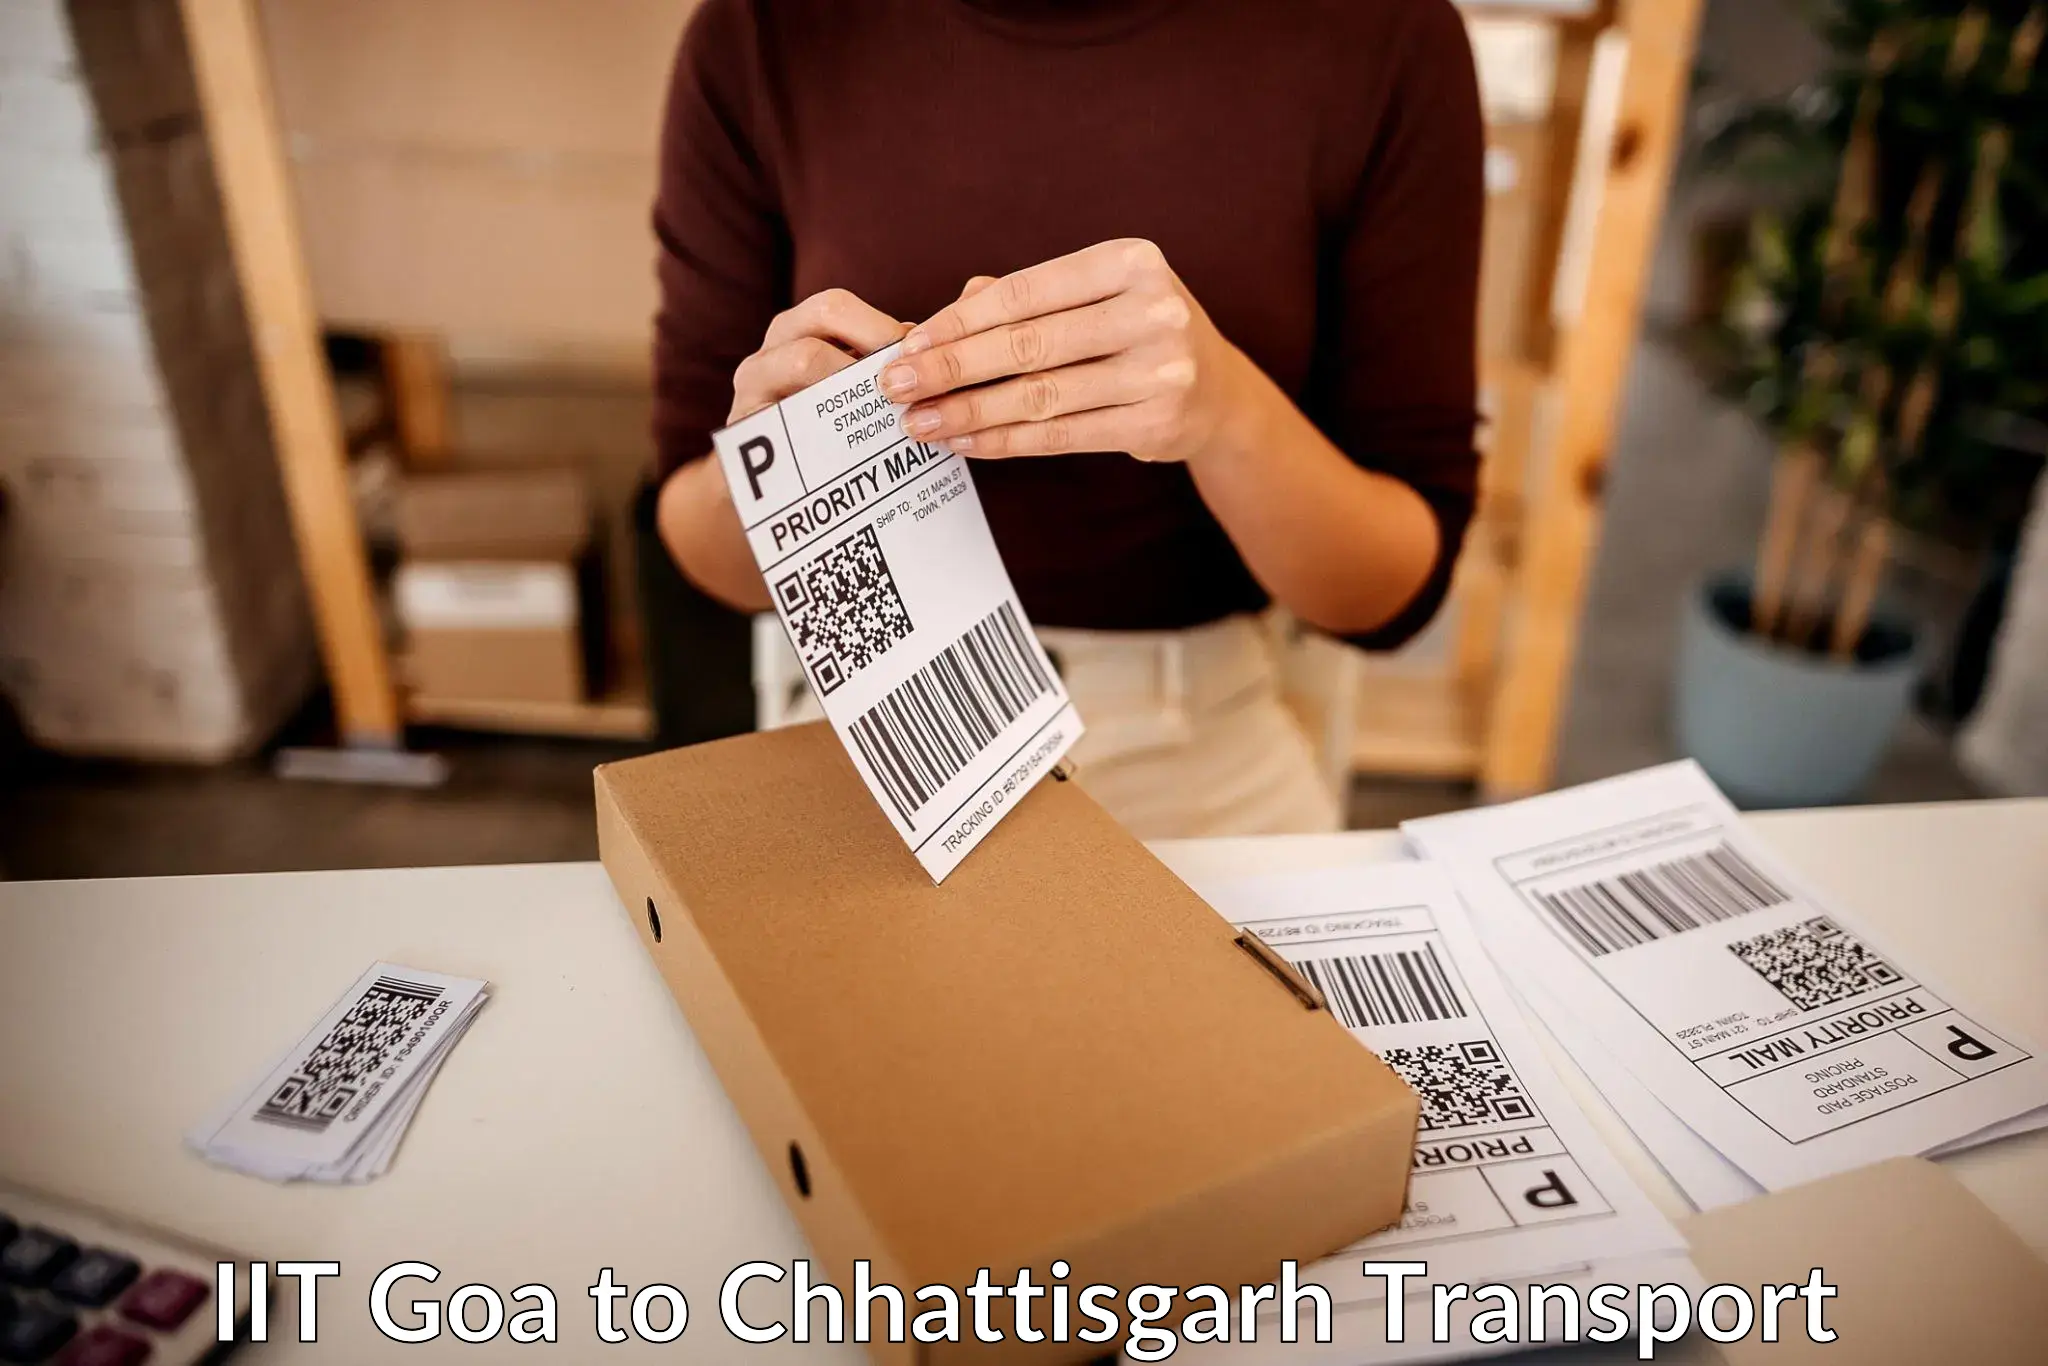 Container transport service IIT Goa to Dongargarh